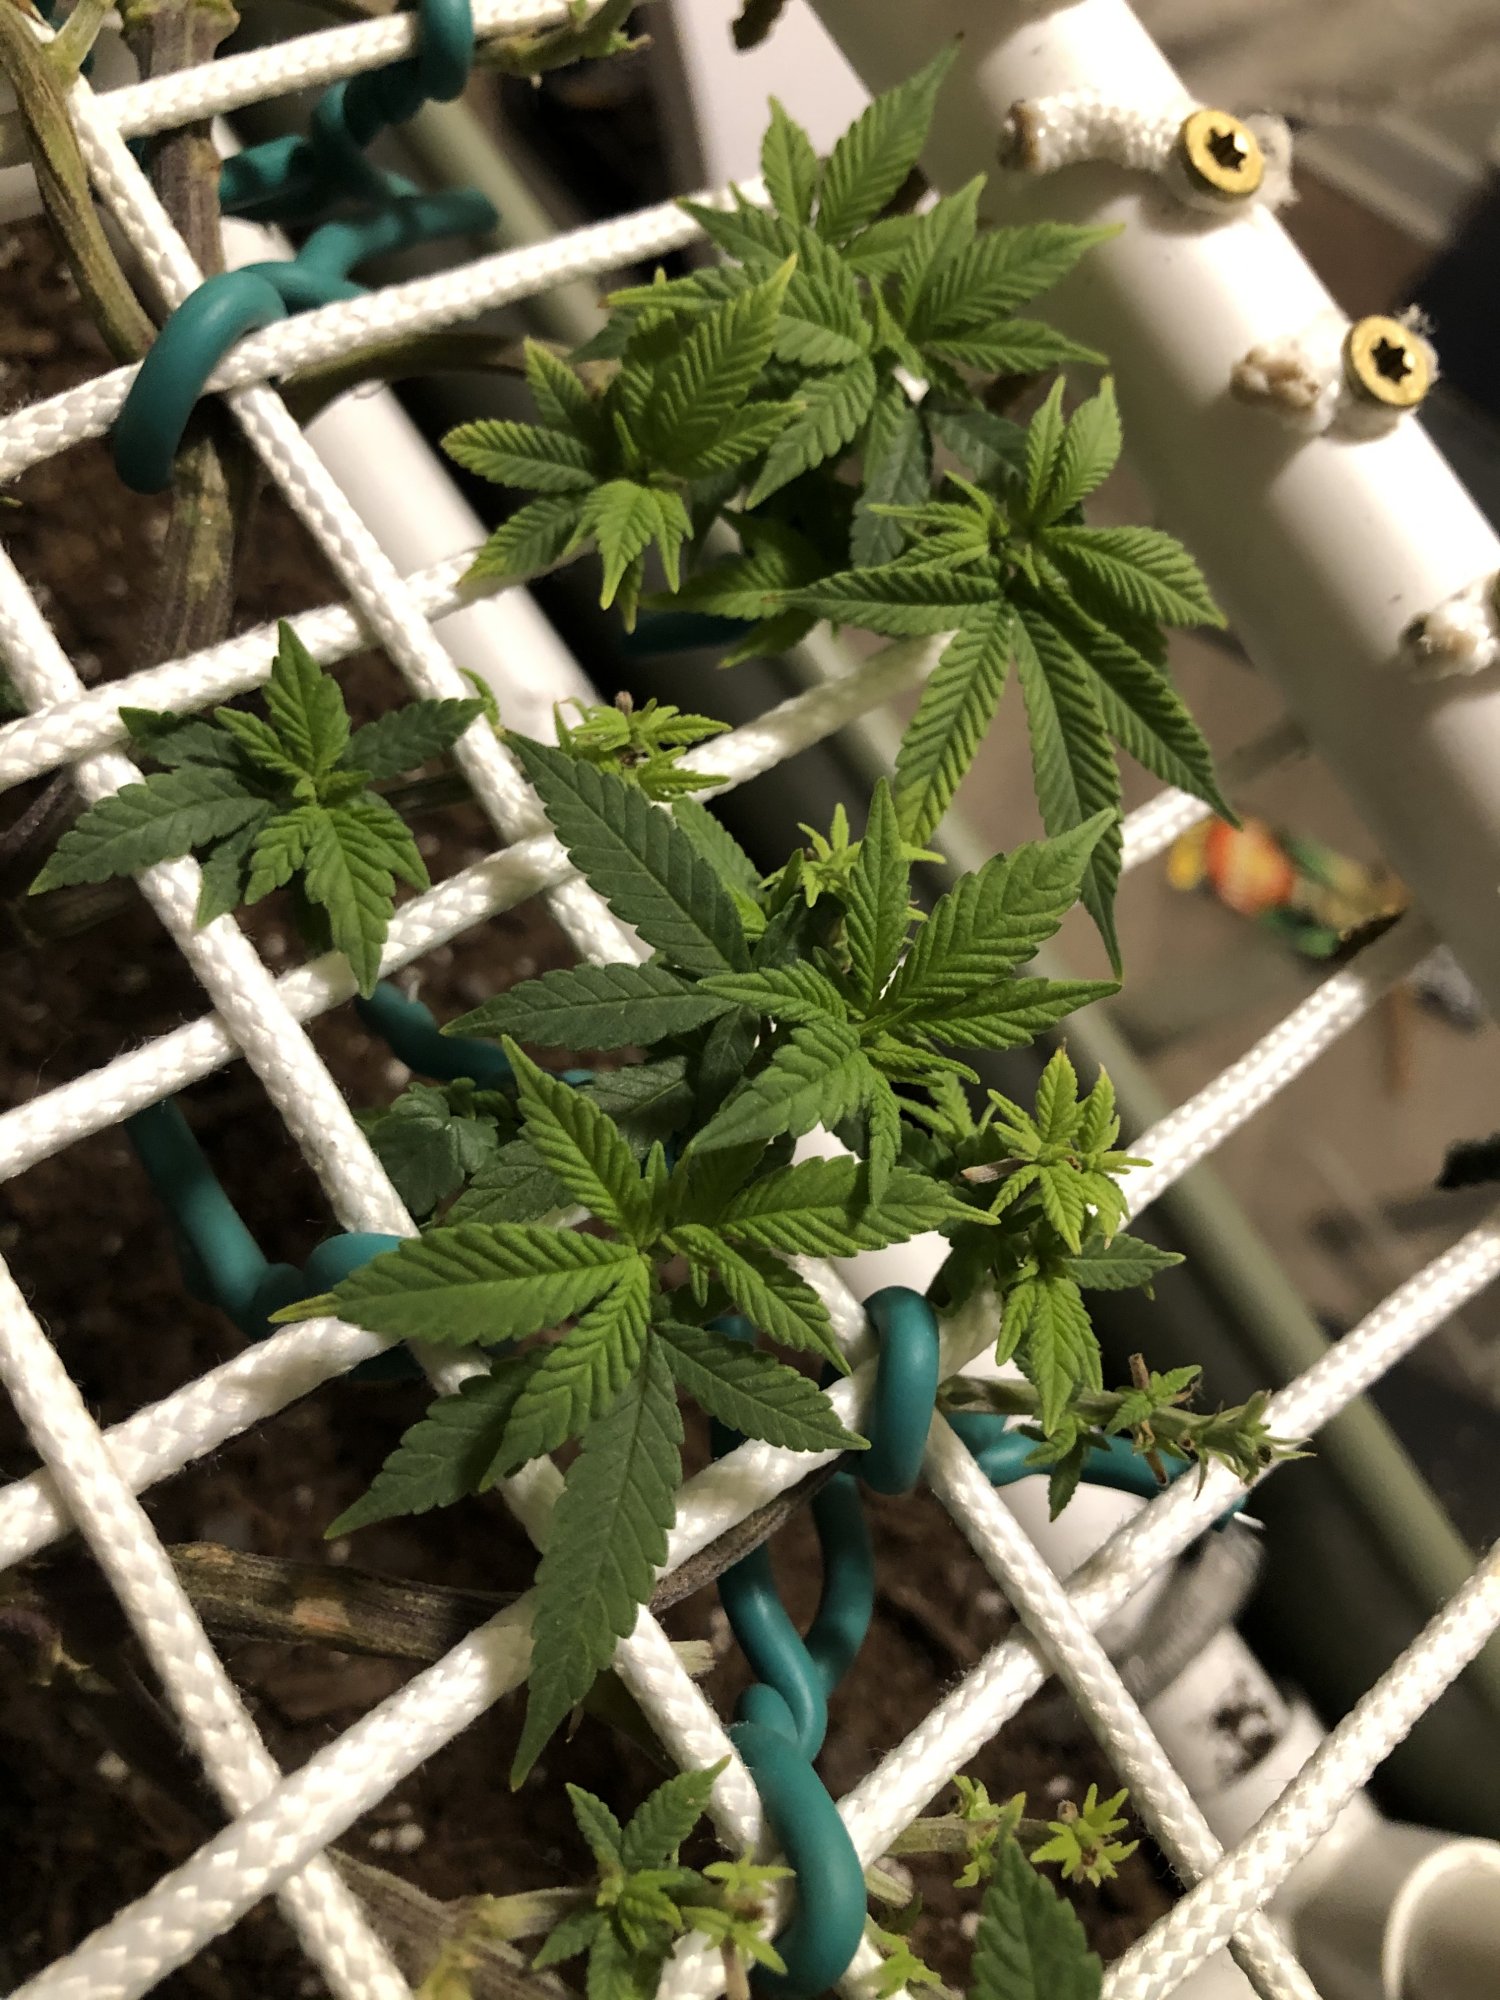 Nutes during the vegative stage 2